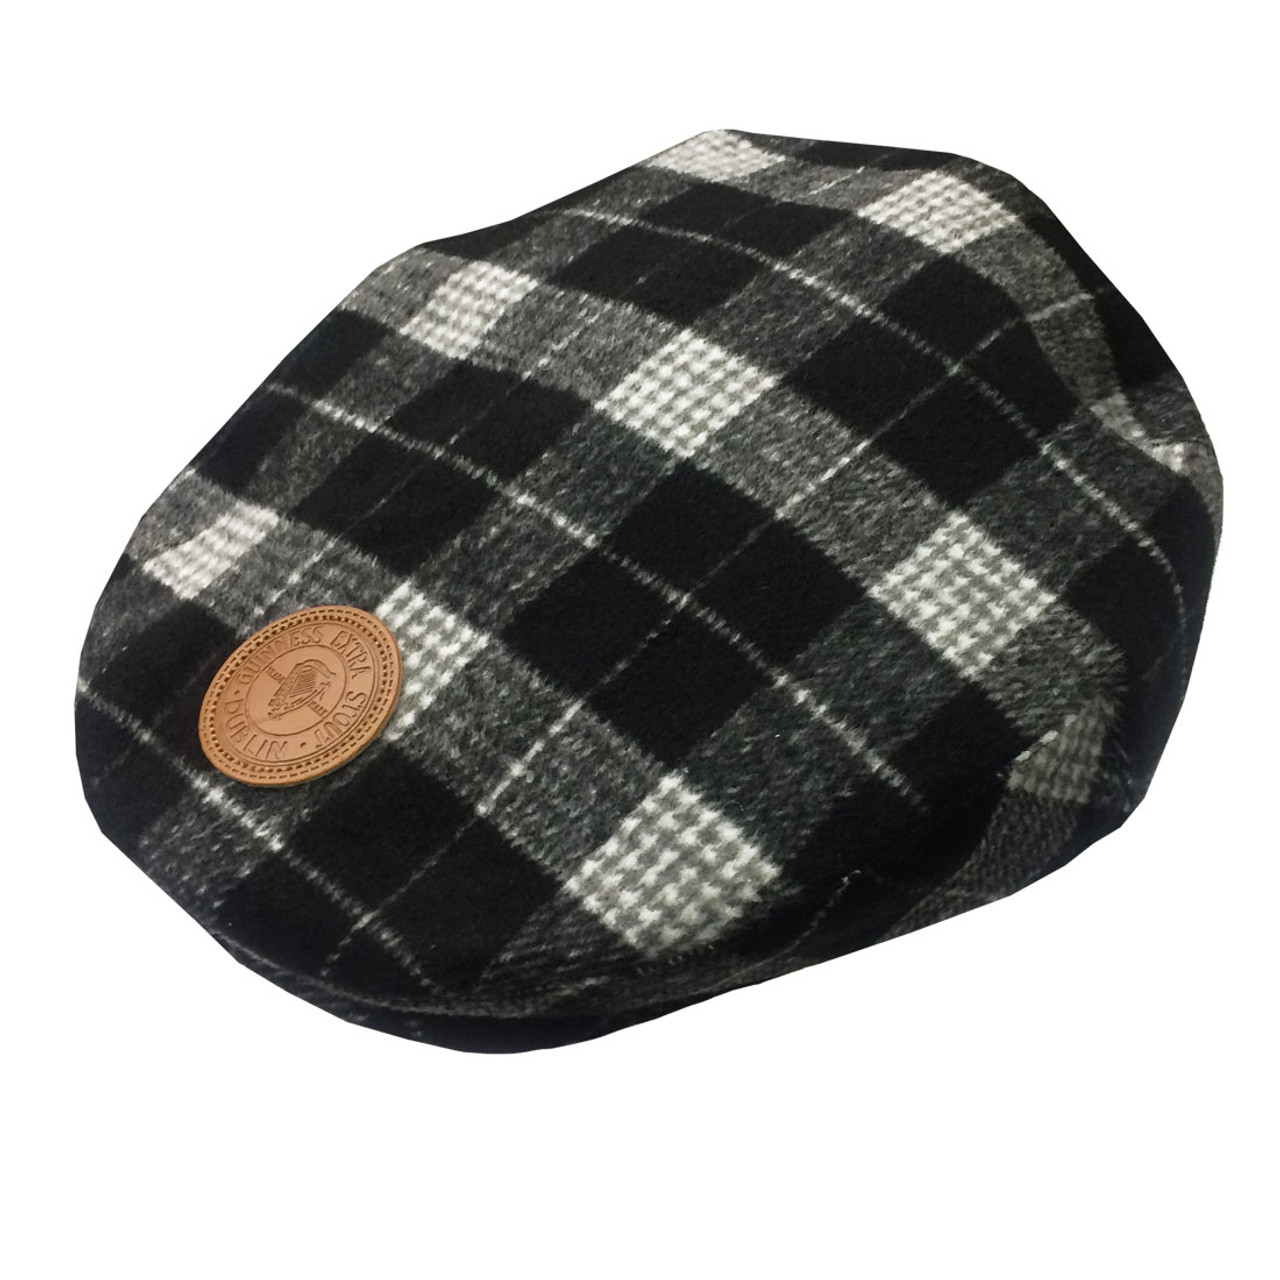 Official Grey Guinness Patch Tweed Flat Cap for Men | ExclusivelyIrish.com